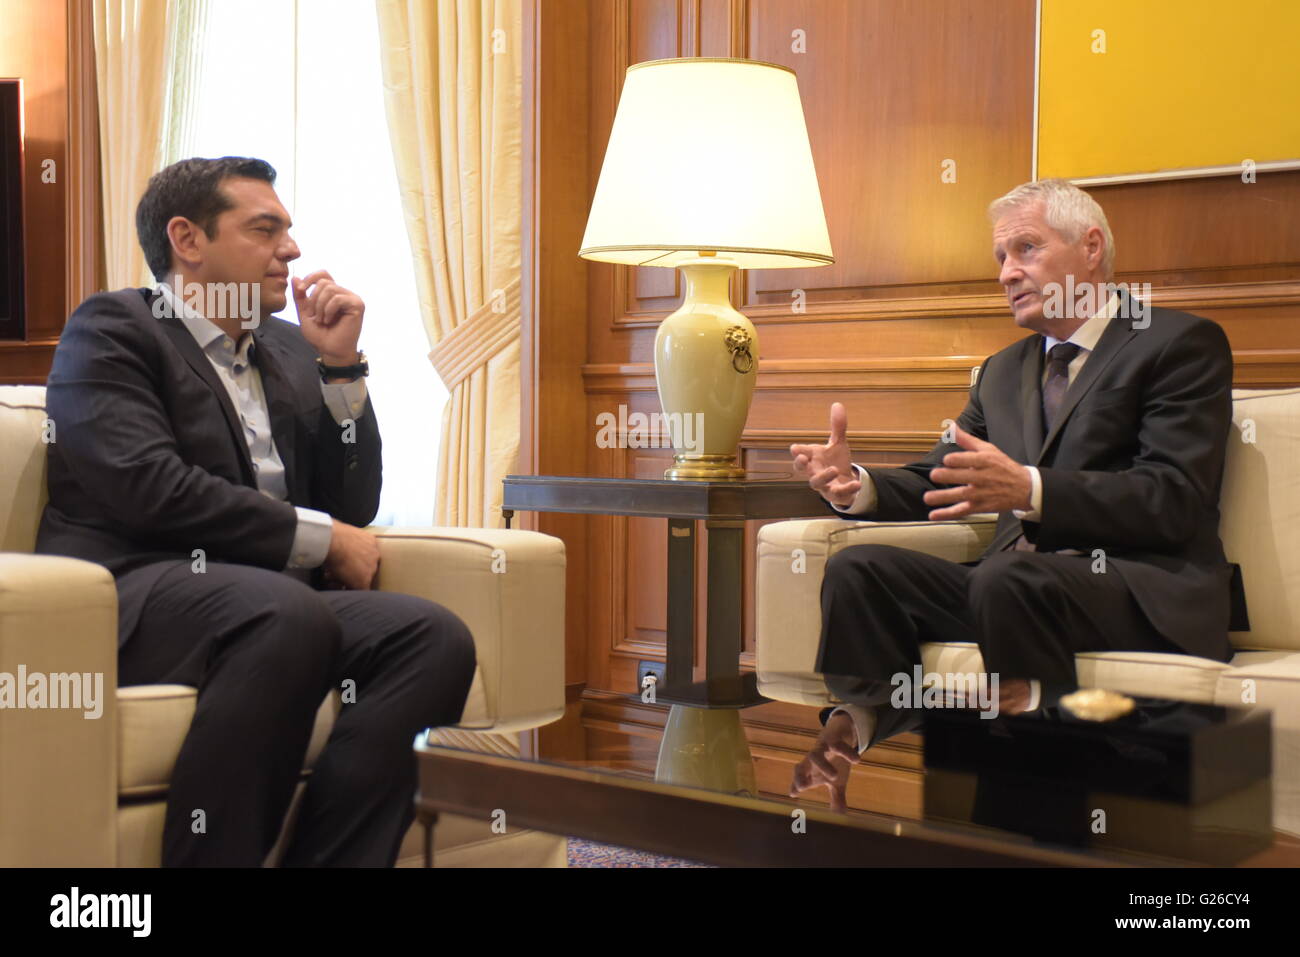 Conversation between Greek Prime Minister Mr. Alexis Tsipras (left) and of General Secretary of Council of Europe, Mr. Thorbjorn Jagland (right). (Photo by Dimitrios Karvountzis/Pacific Press) Stock Photo